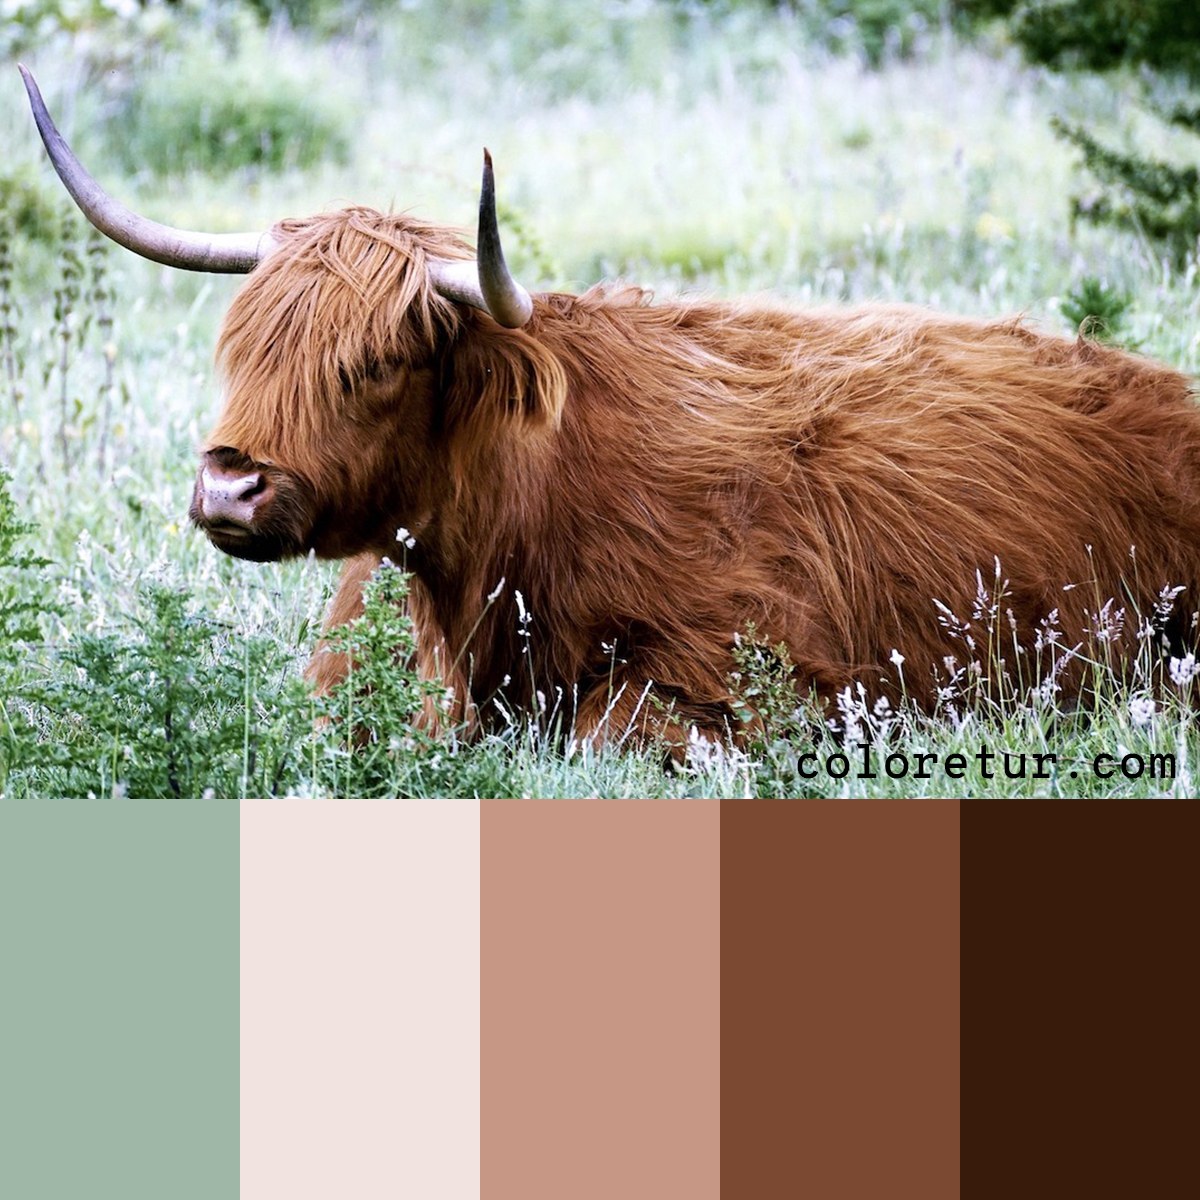 A warm, calm palette from the hair of a Scottish Highlander Cow.